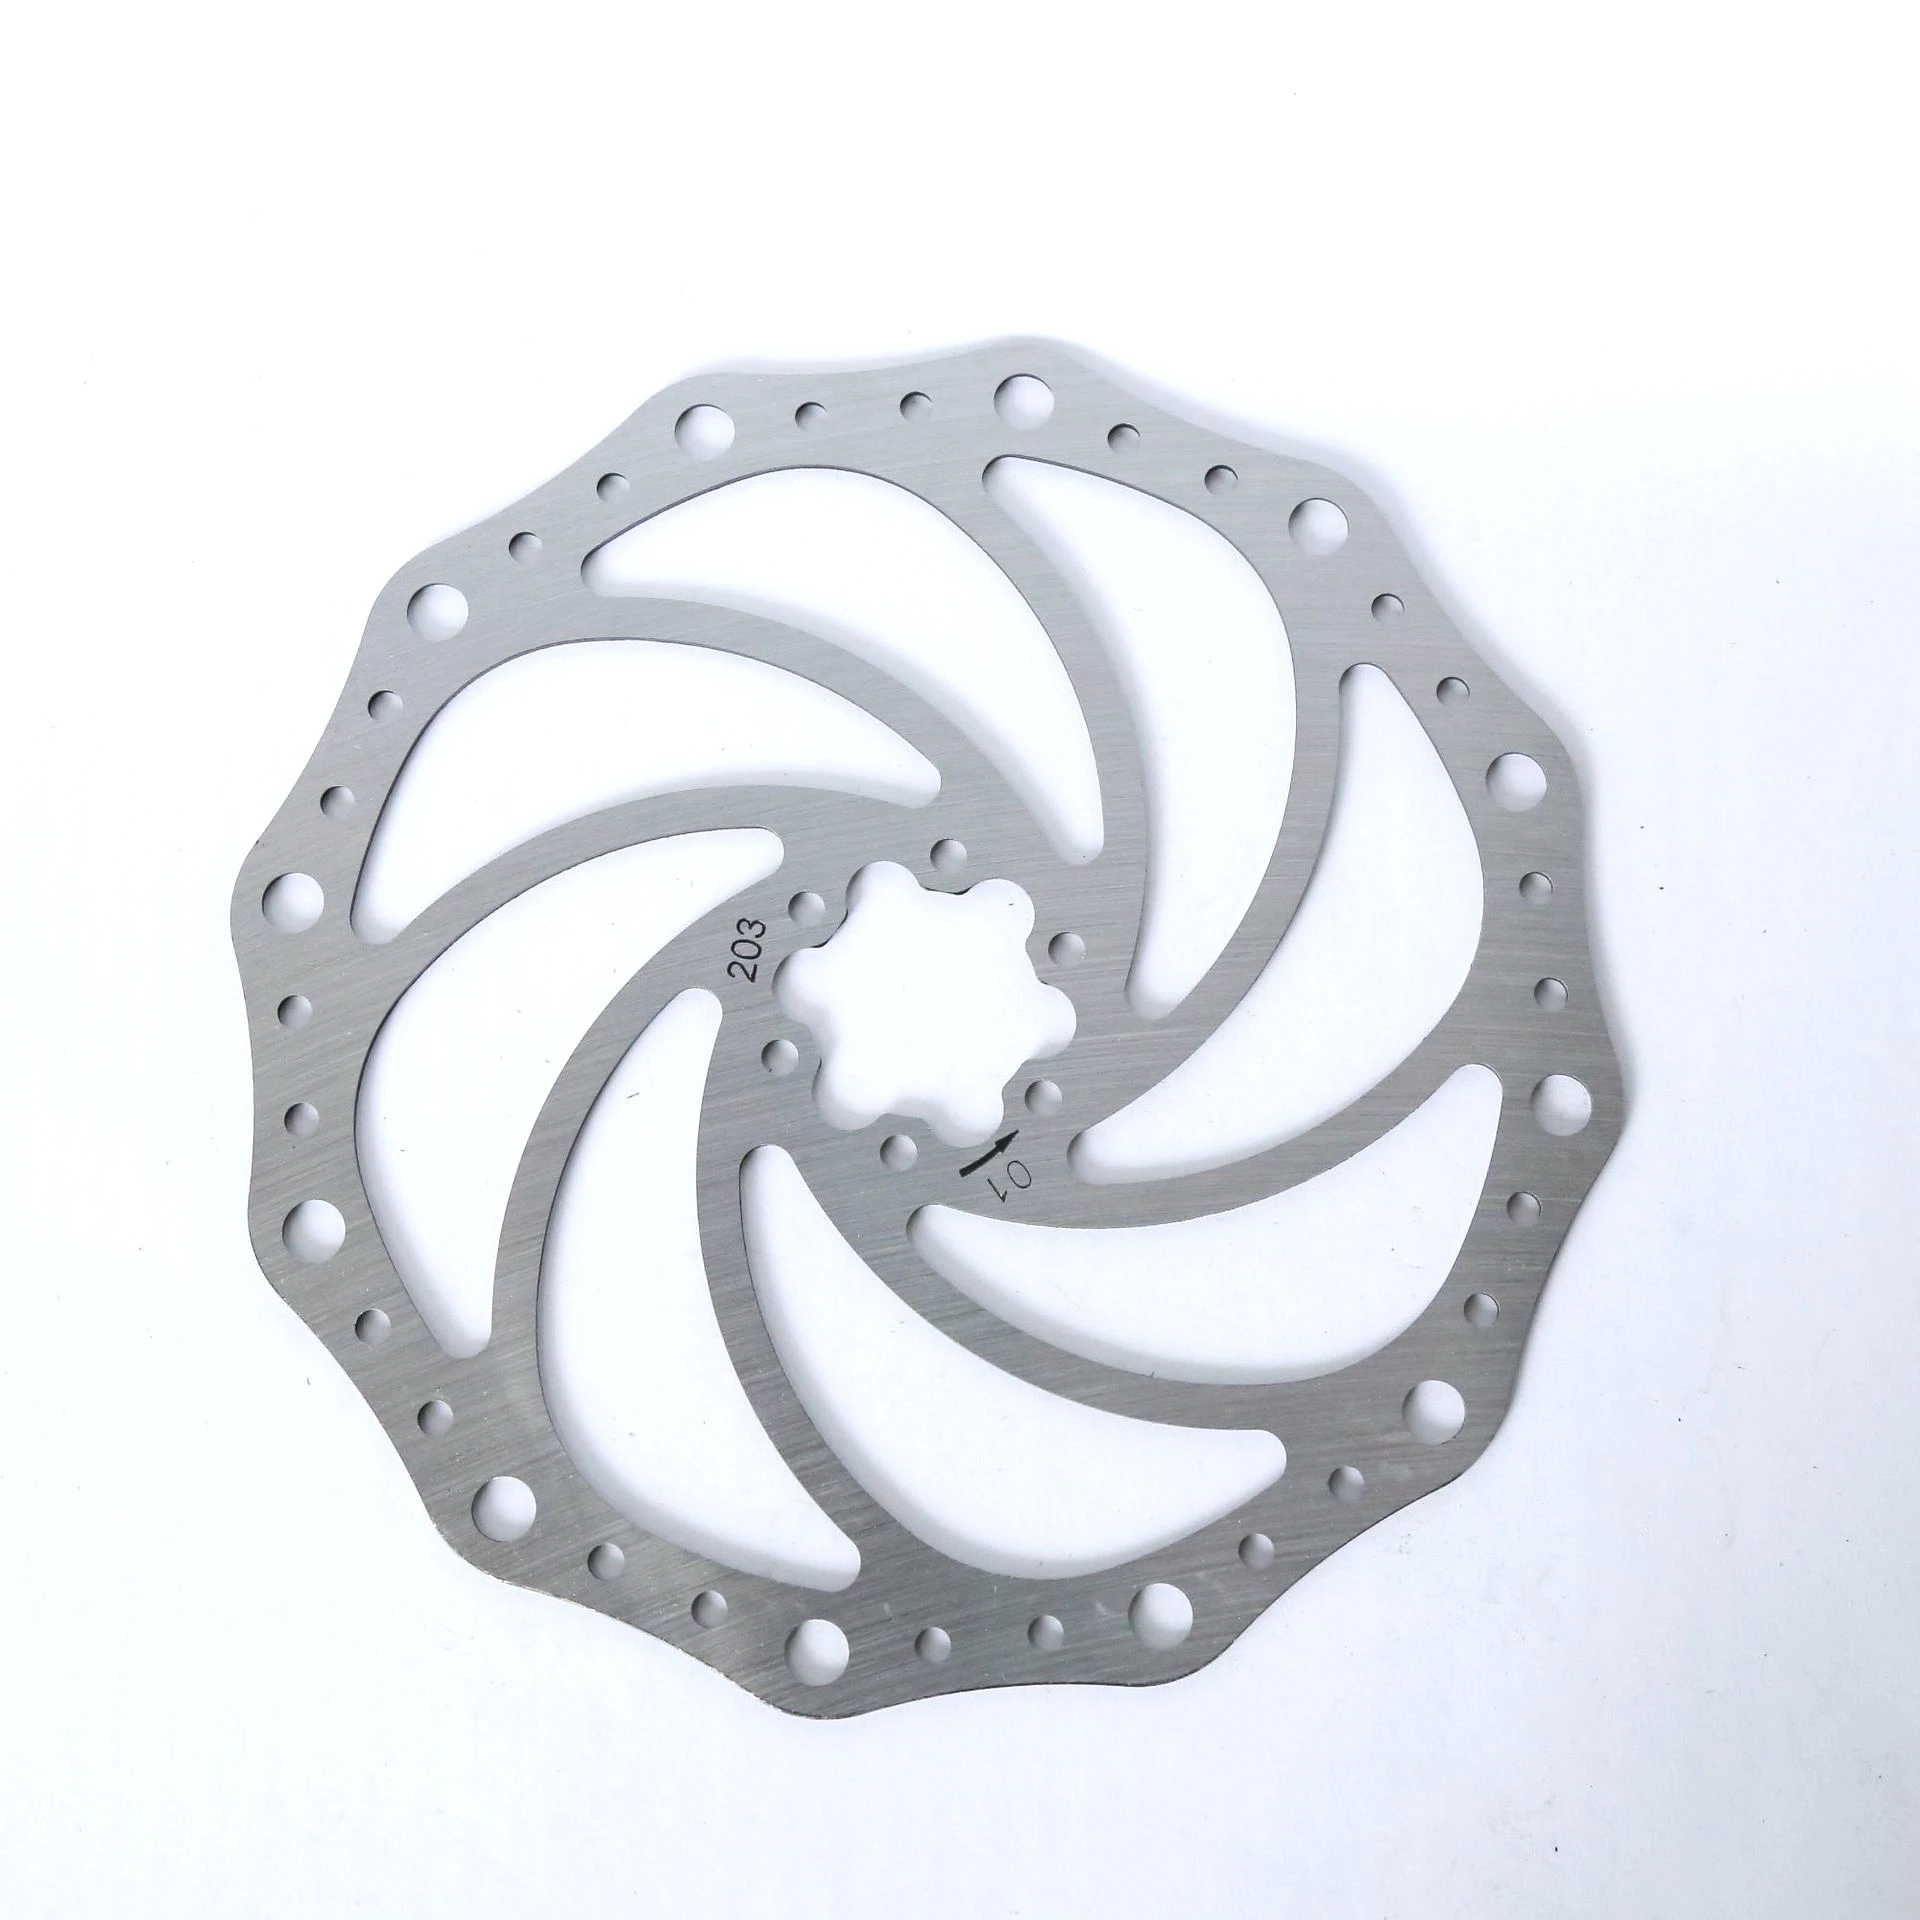 160mm,180mm,203mm High Quality Stainless Steel Bicycle Floating Brake Disc Rotor Disc Bicycle Brake Disc